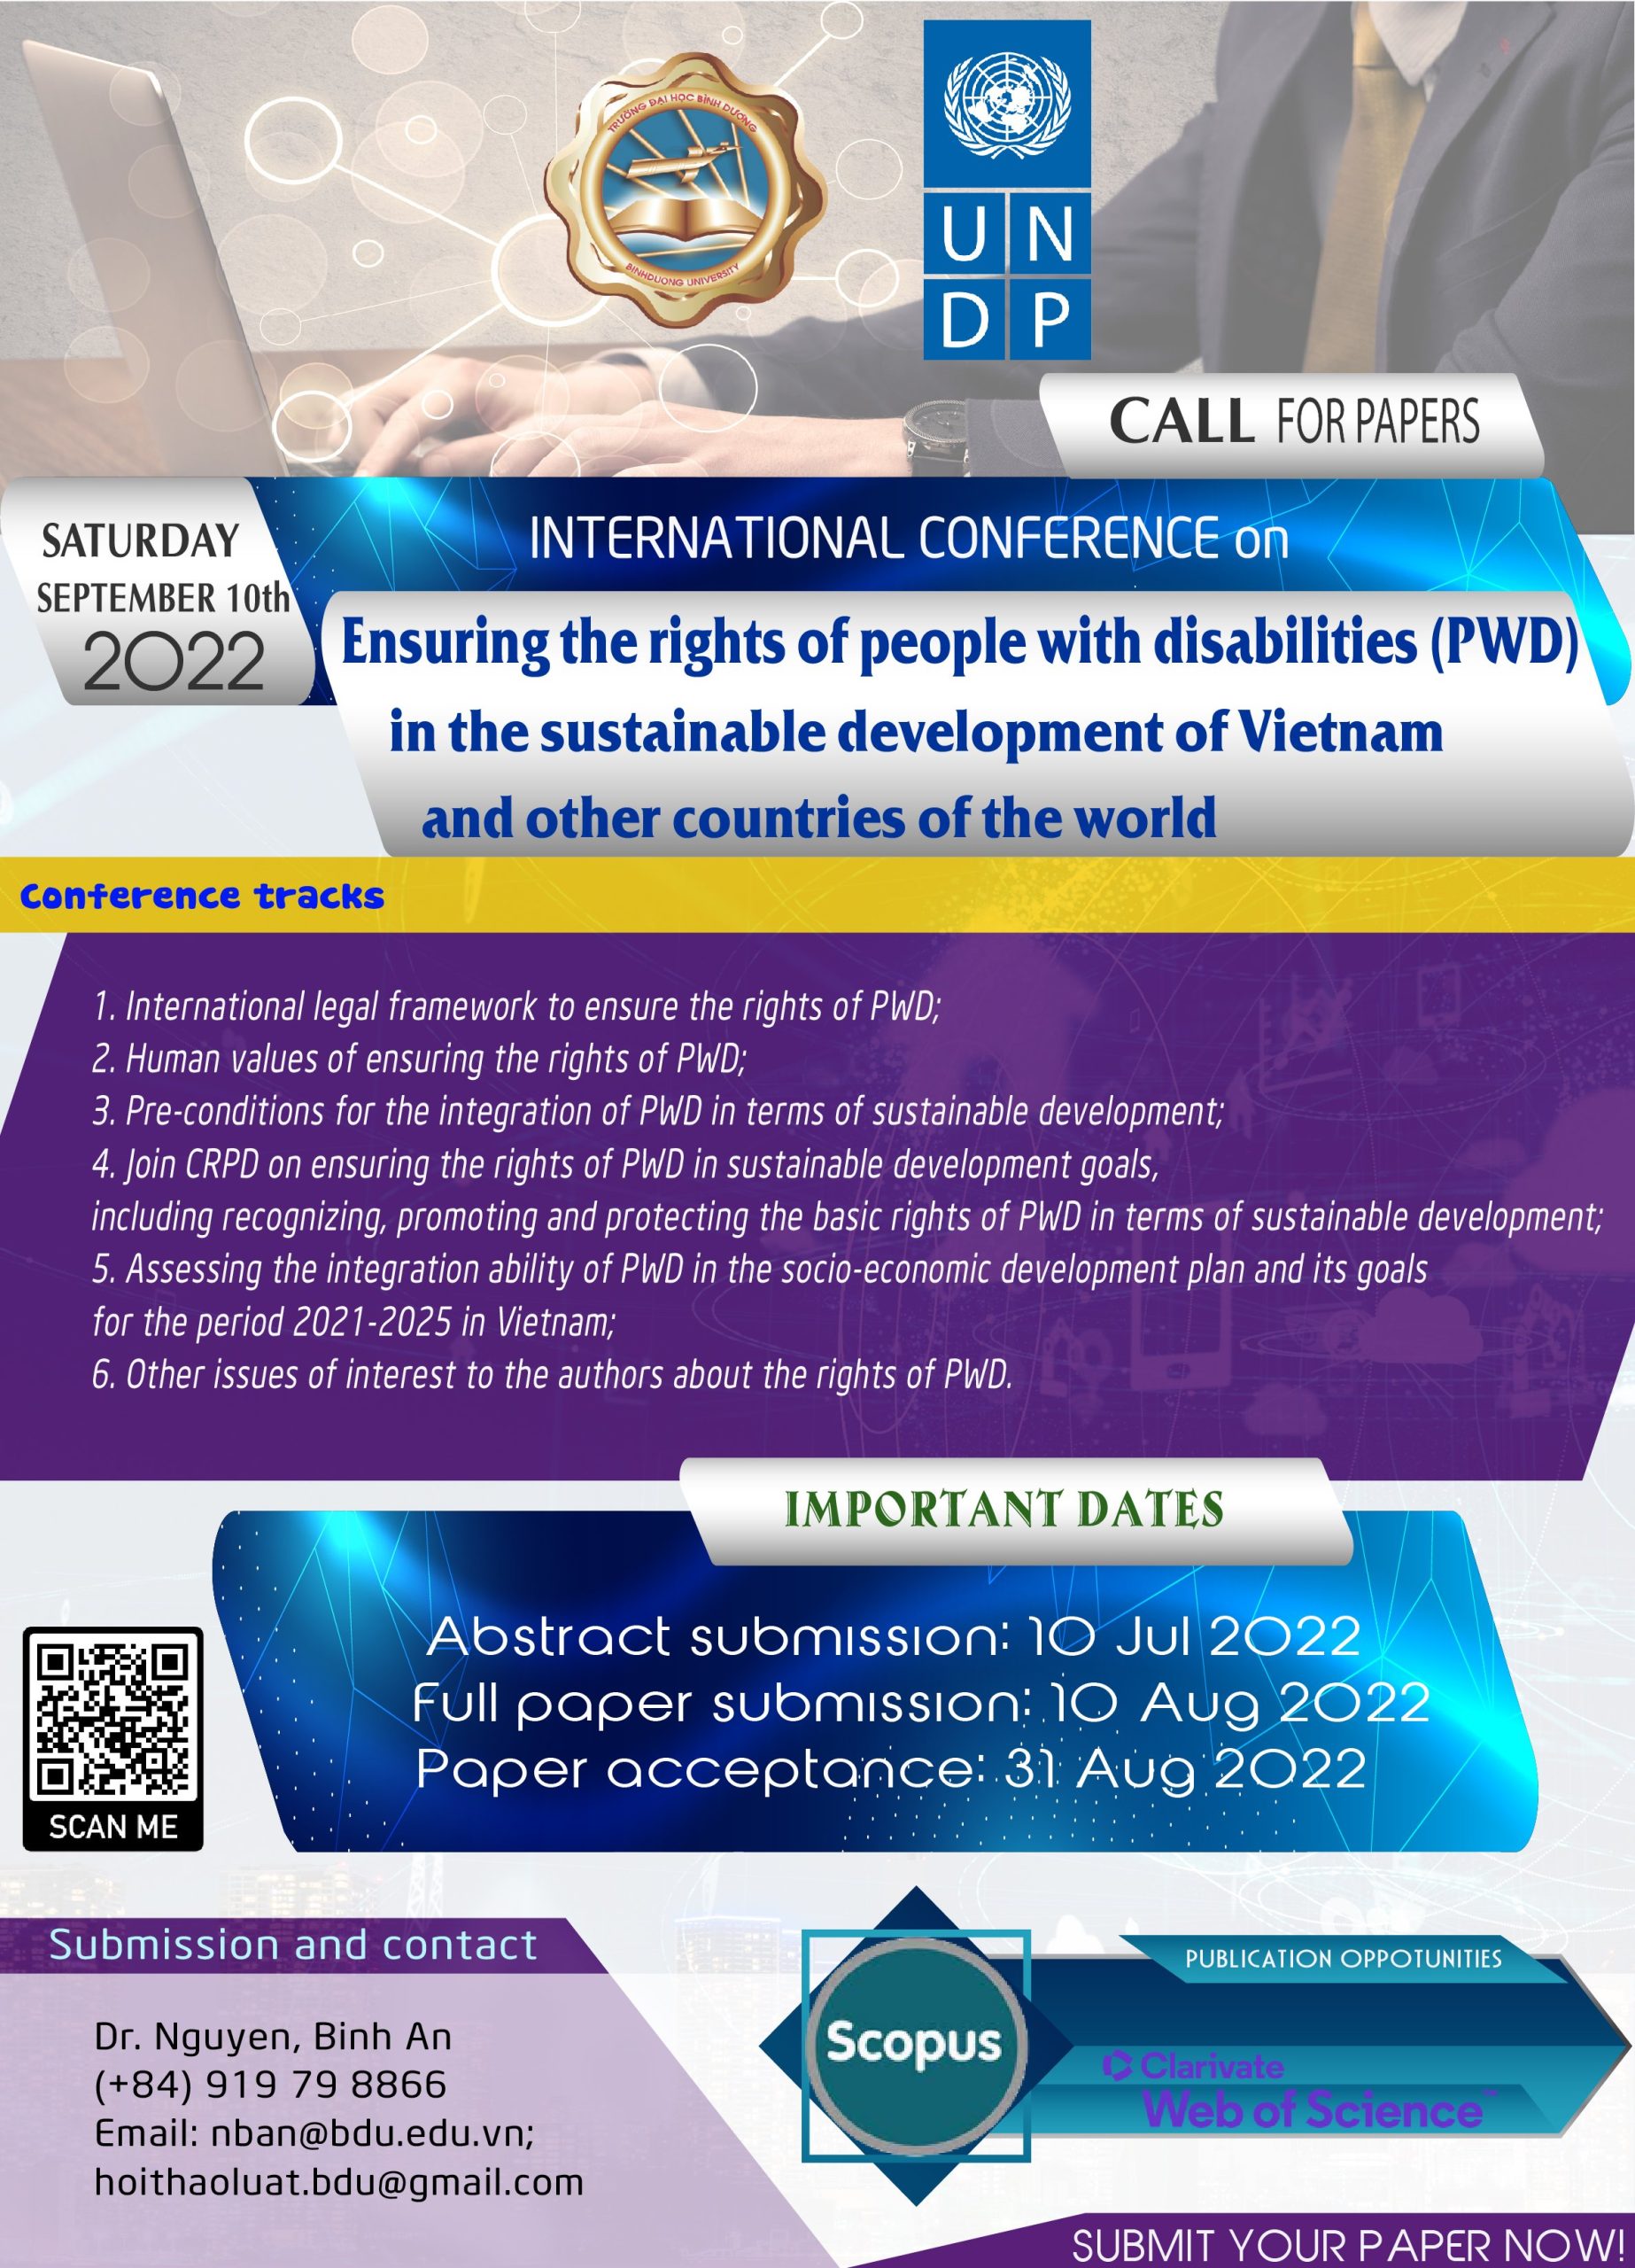 [CALL FOR PAPERS] Articles for the International Scientific Conference: “Ensuring the rights of people with disabilities in the sustainable development of Vietnam and other countries of the world”